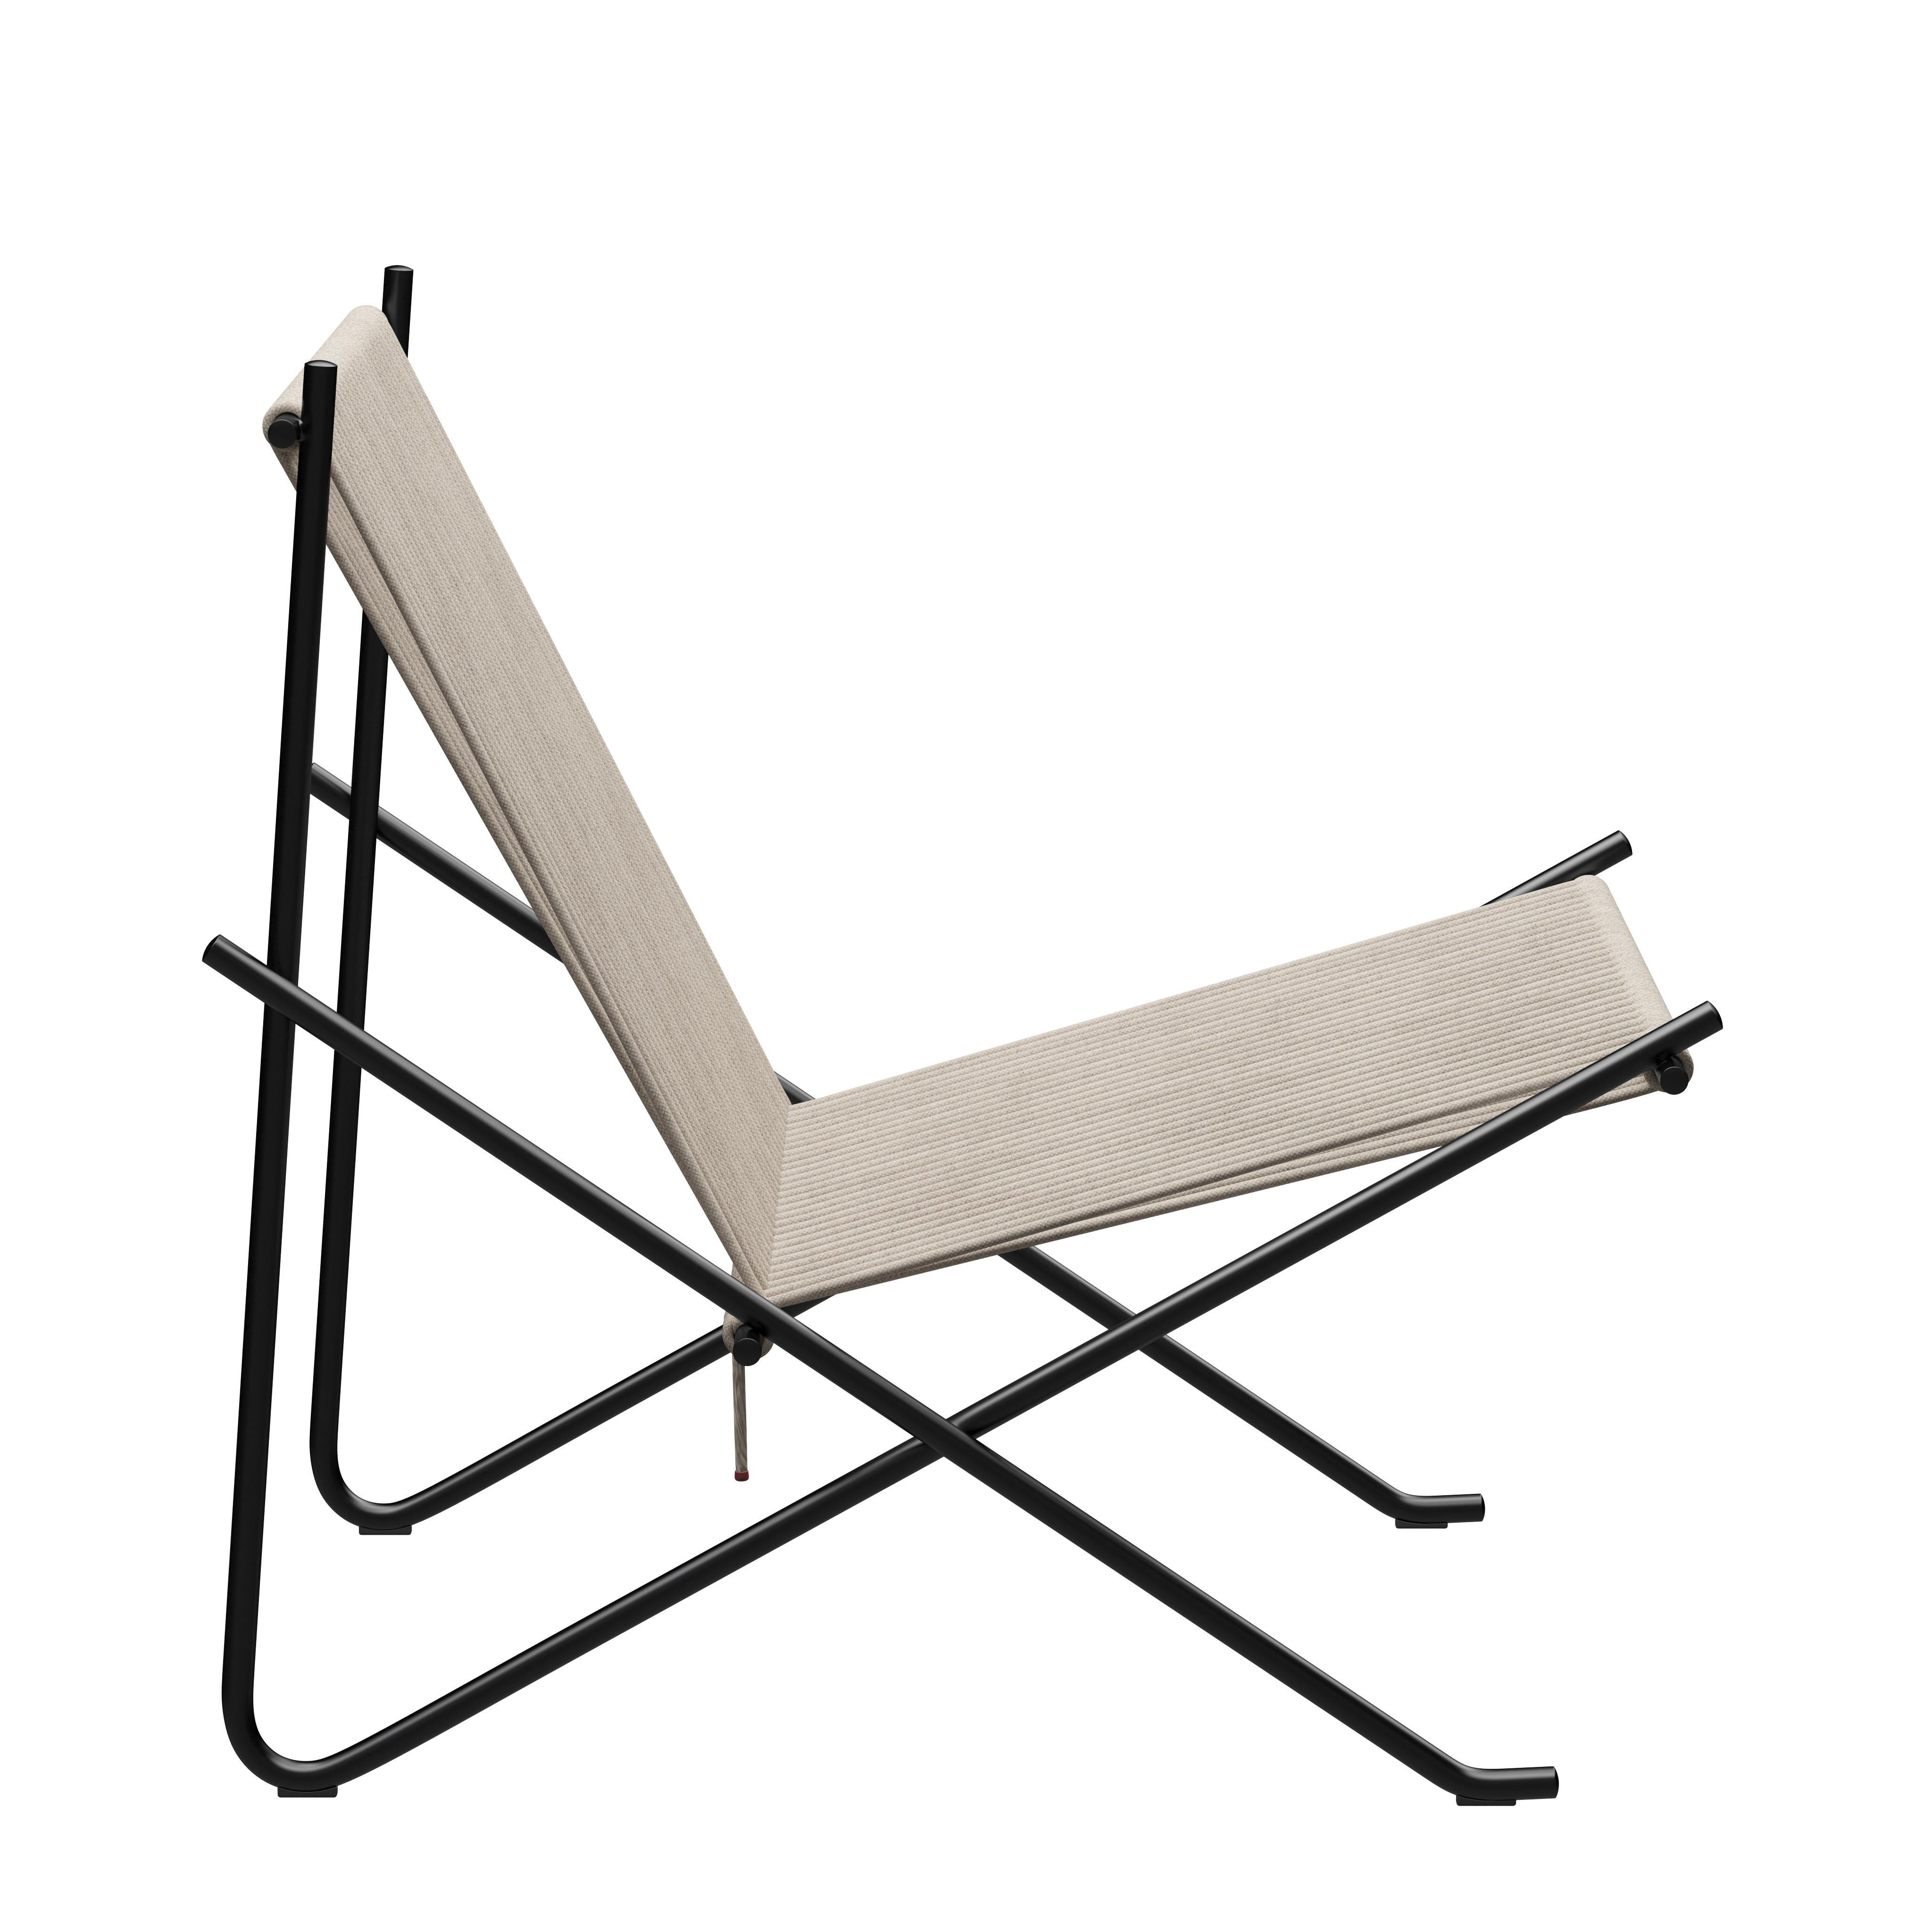 'PK4' Lounge Chair for Fritz Hansen in Natural Flag Halyard with Black Frame.

Established in 1872, Fritz Hansen has become synonymous with legendary Danish design. Combining timeless craftsmanship with an emphasis on sustainability, the brand’s